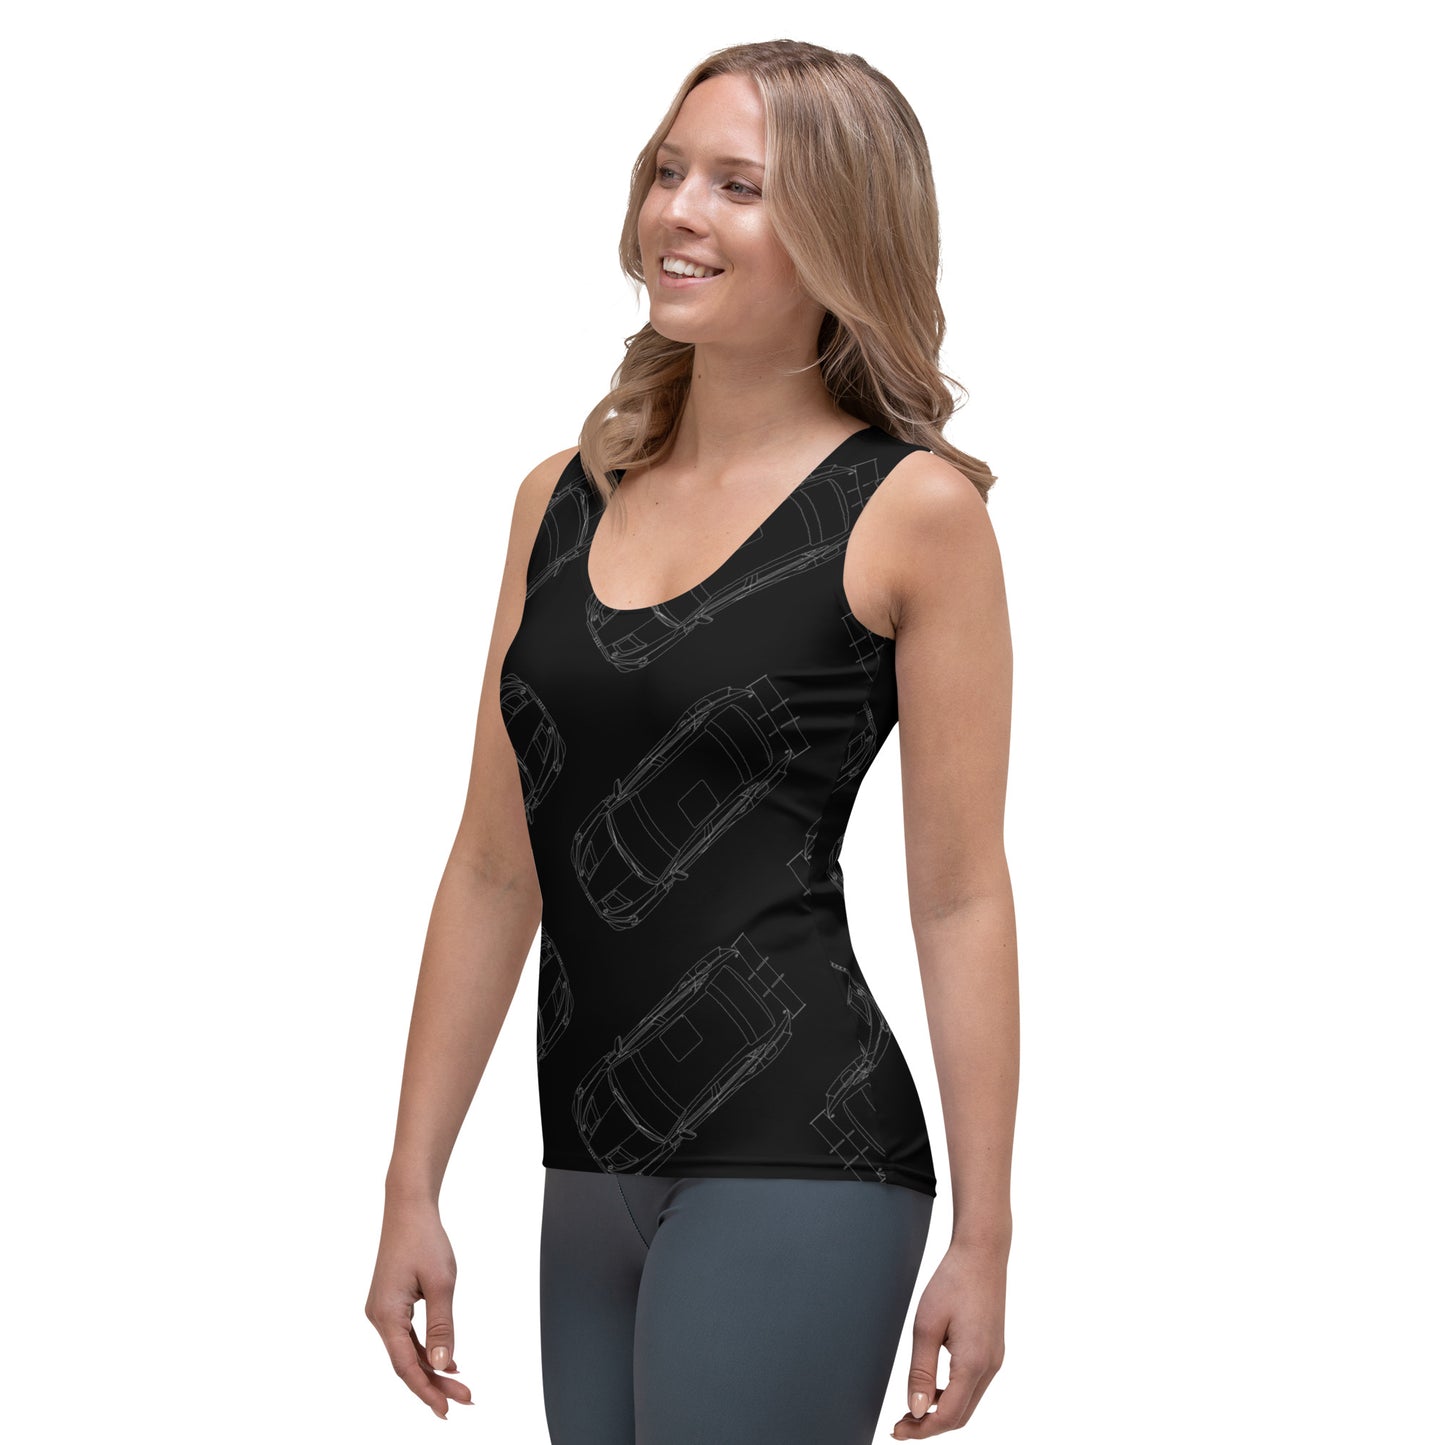 OnTheLine GRN | TCR gen2 Sublimation Tank Top